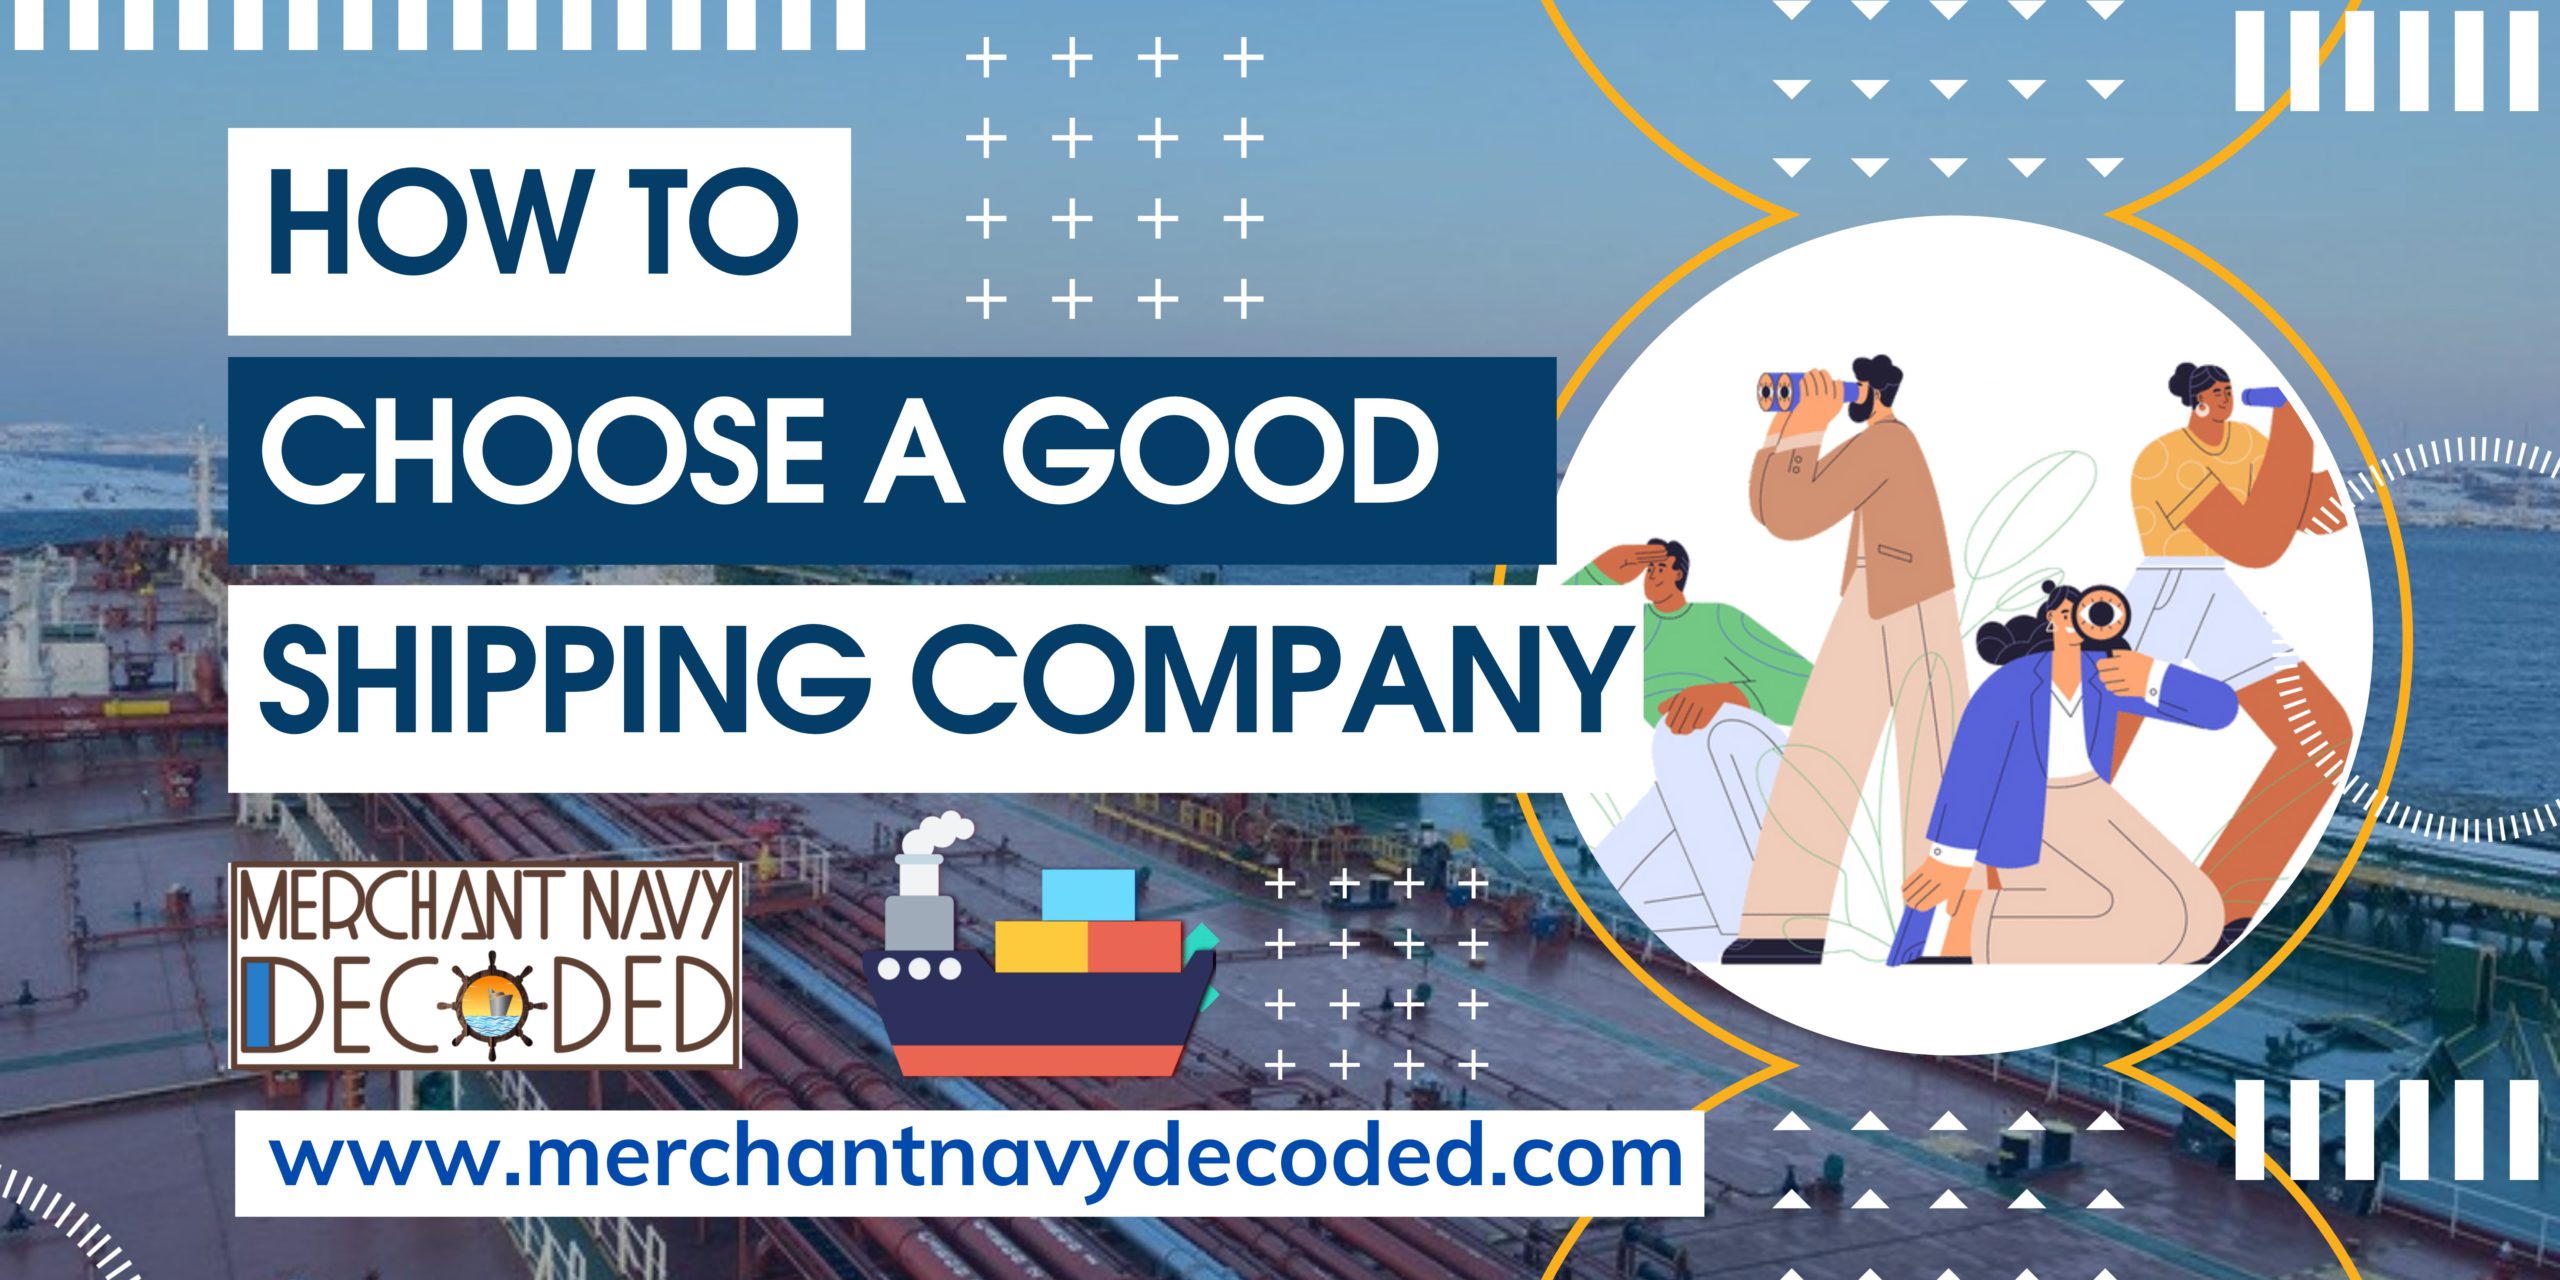 HOW TO CHOOSE A GOOD SHIPPING COMPANY?